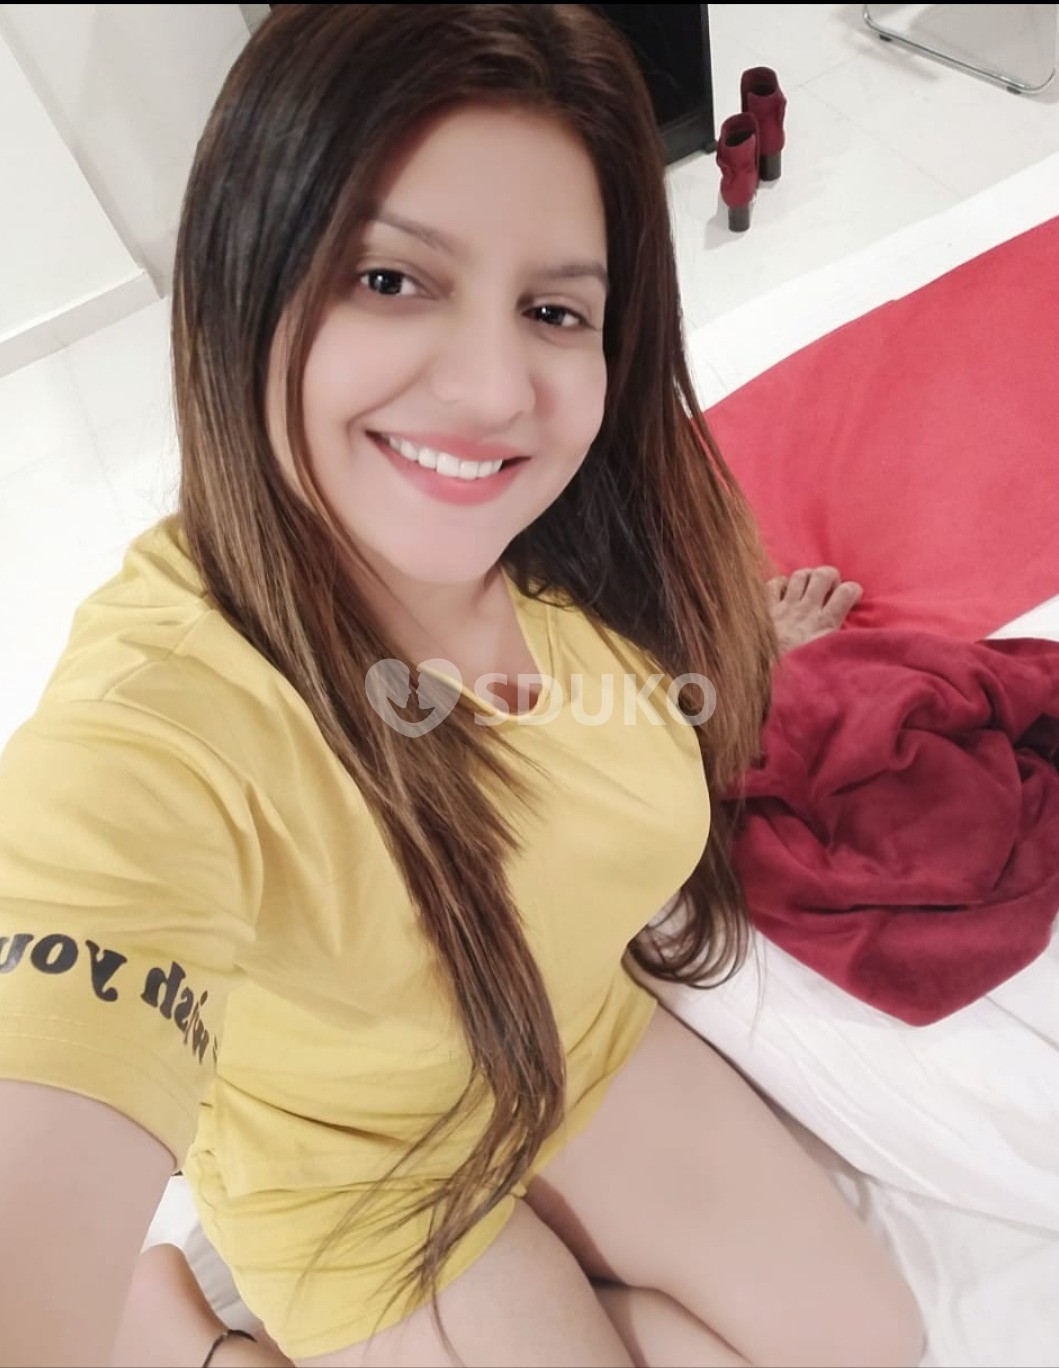 SARJAPUR HOT AND HIGH PROFILE VIP CALL 24 X 7 HRS AVAILABLE 24 X 7 HRS